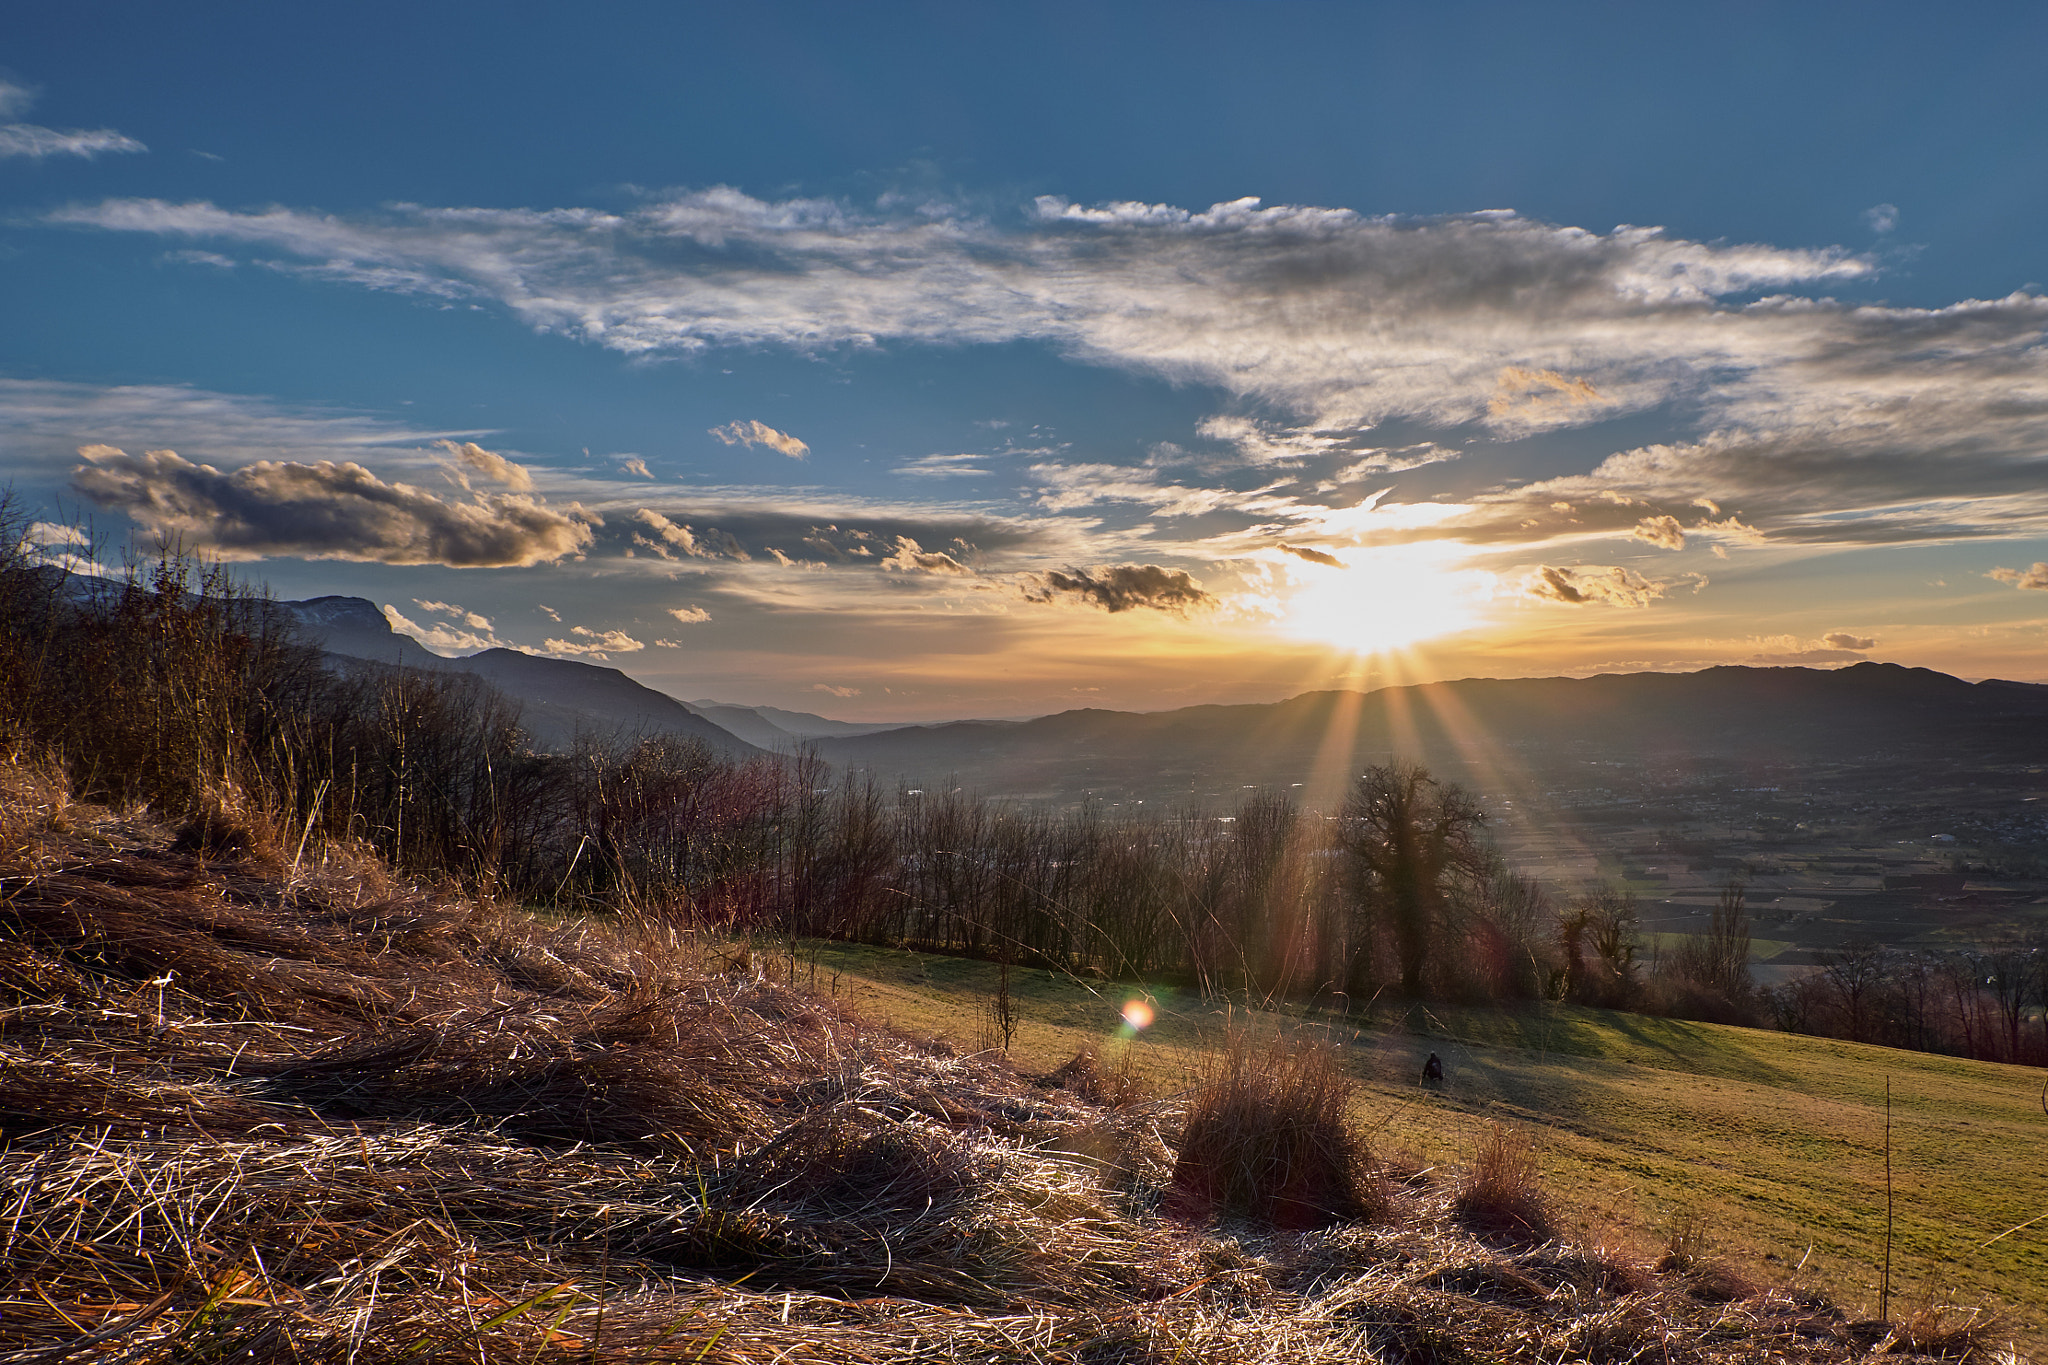 Fujifilm X-T10 + Fujifilm XC 16-50mm F3.5-5.6 OIS sample photo. Sunset on coublevie (isère) photography